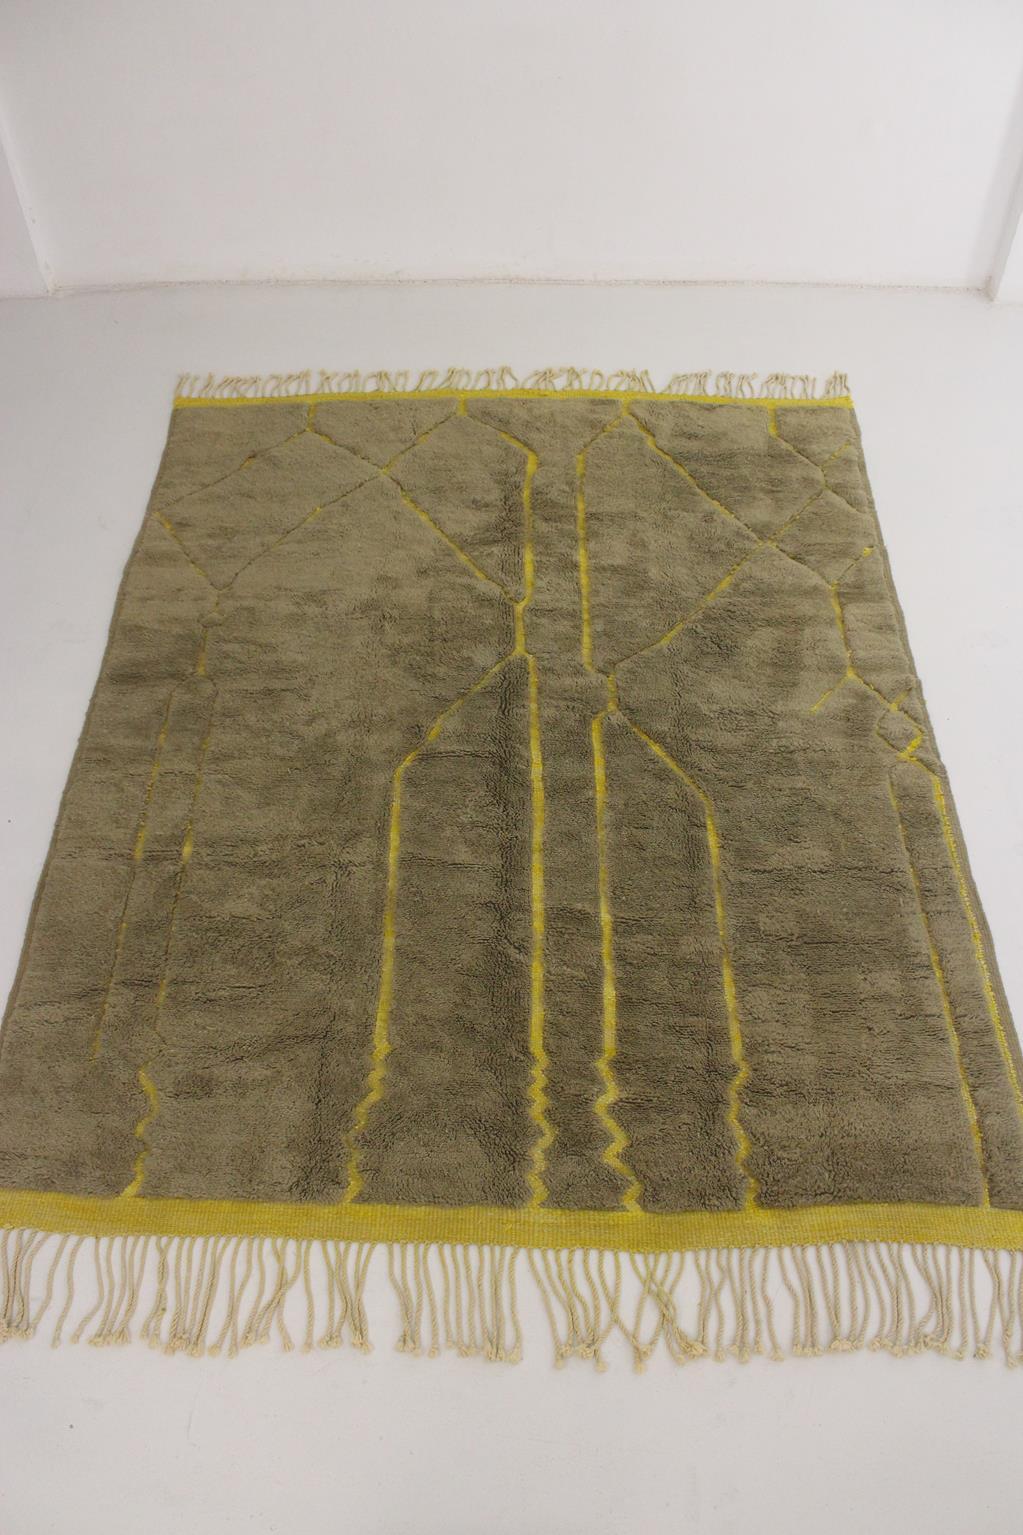 This large, modern-style, Mrirt rug was made by artisans in the area of Khenifra, Atlas Mountains, Morocco. Groups of women there still weave by hand on traditional, vertical looms to make these new rugs.

This rug is made of premium quality, soft